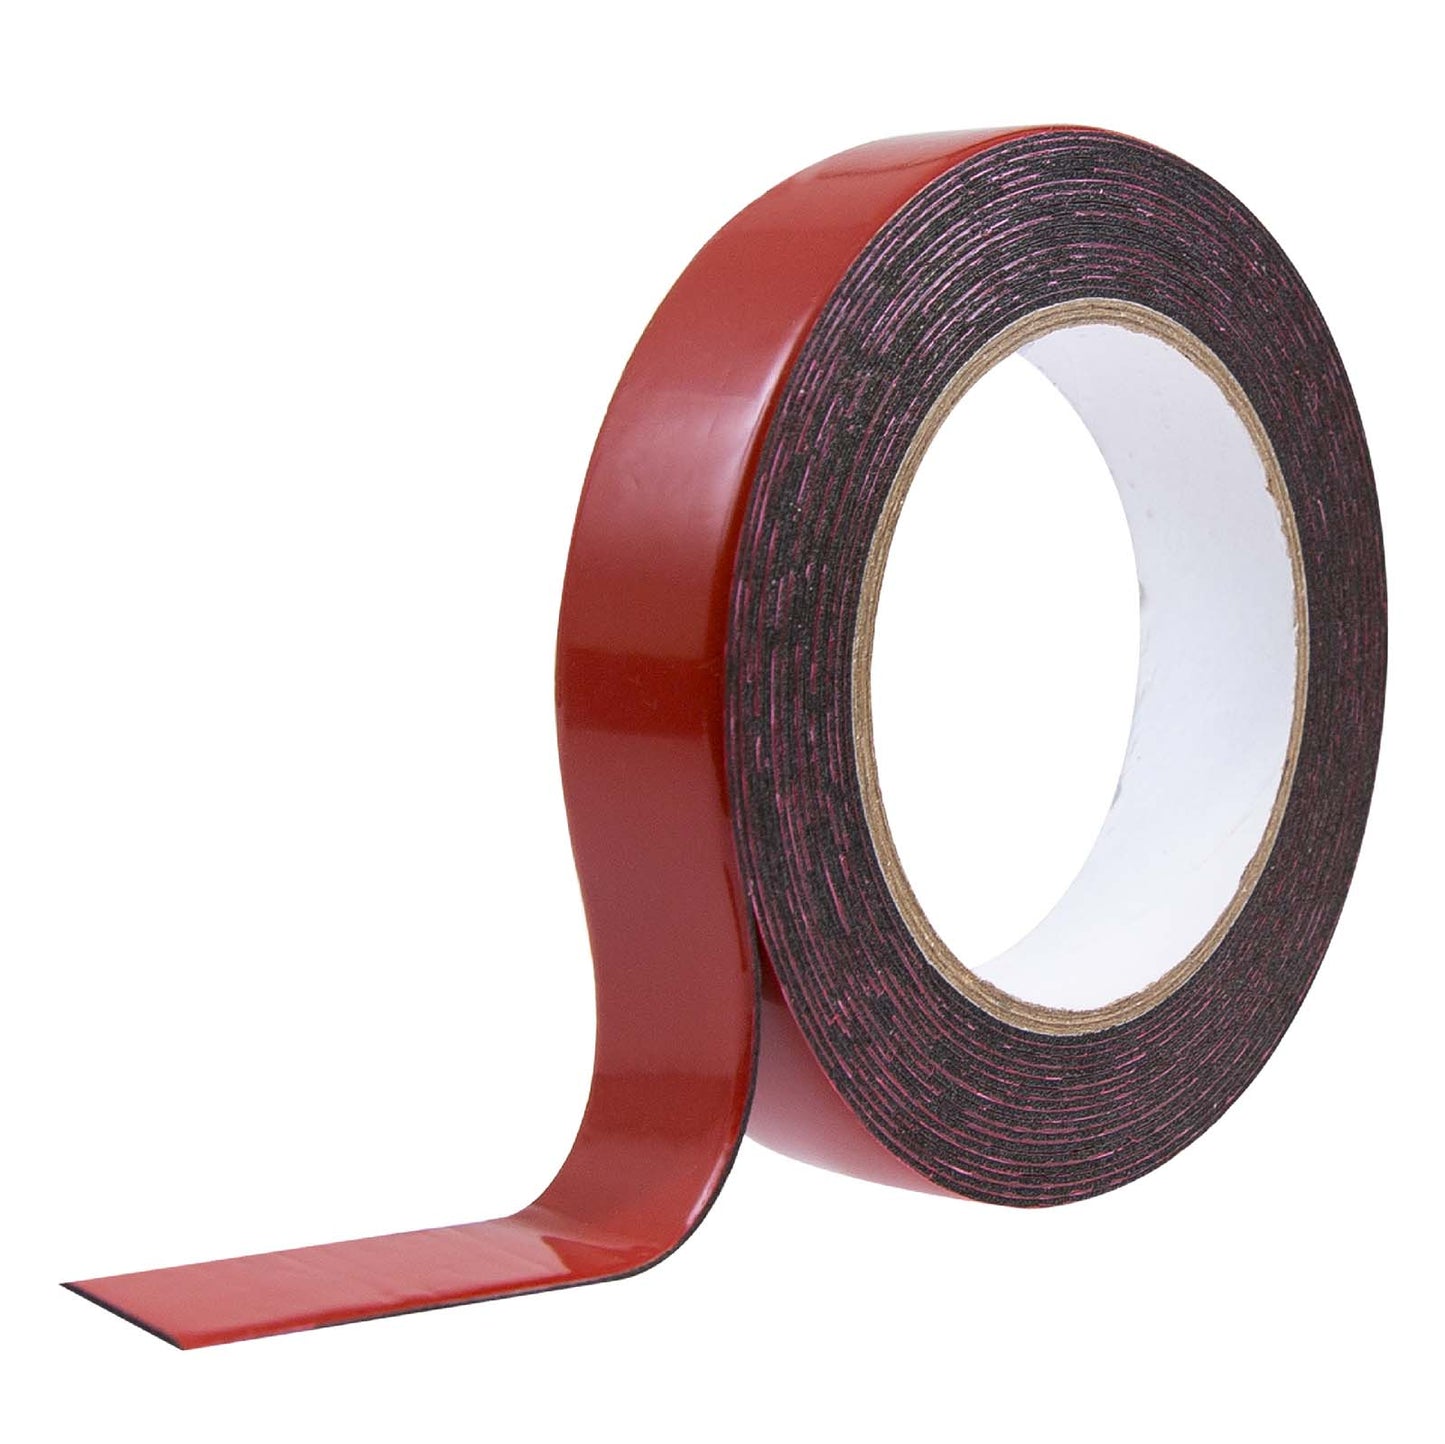 Black Outdoor Mounting Tape - 16.4' x 0.94" Roll